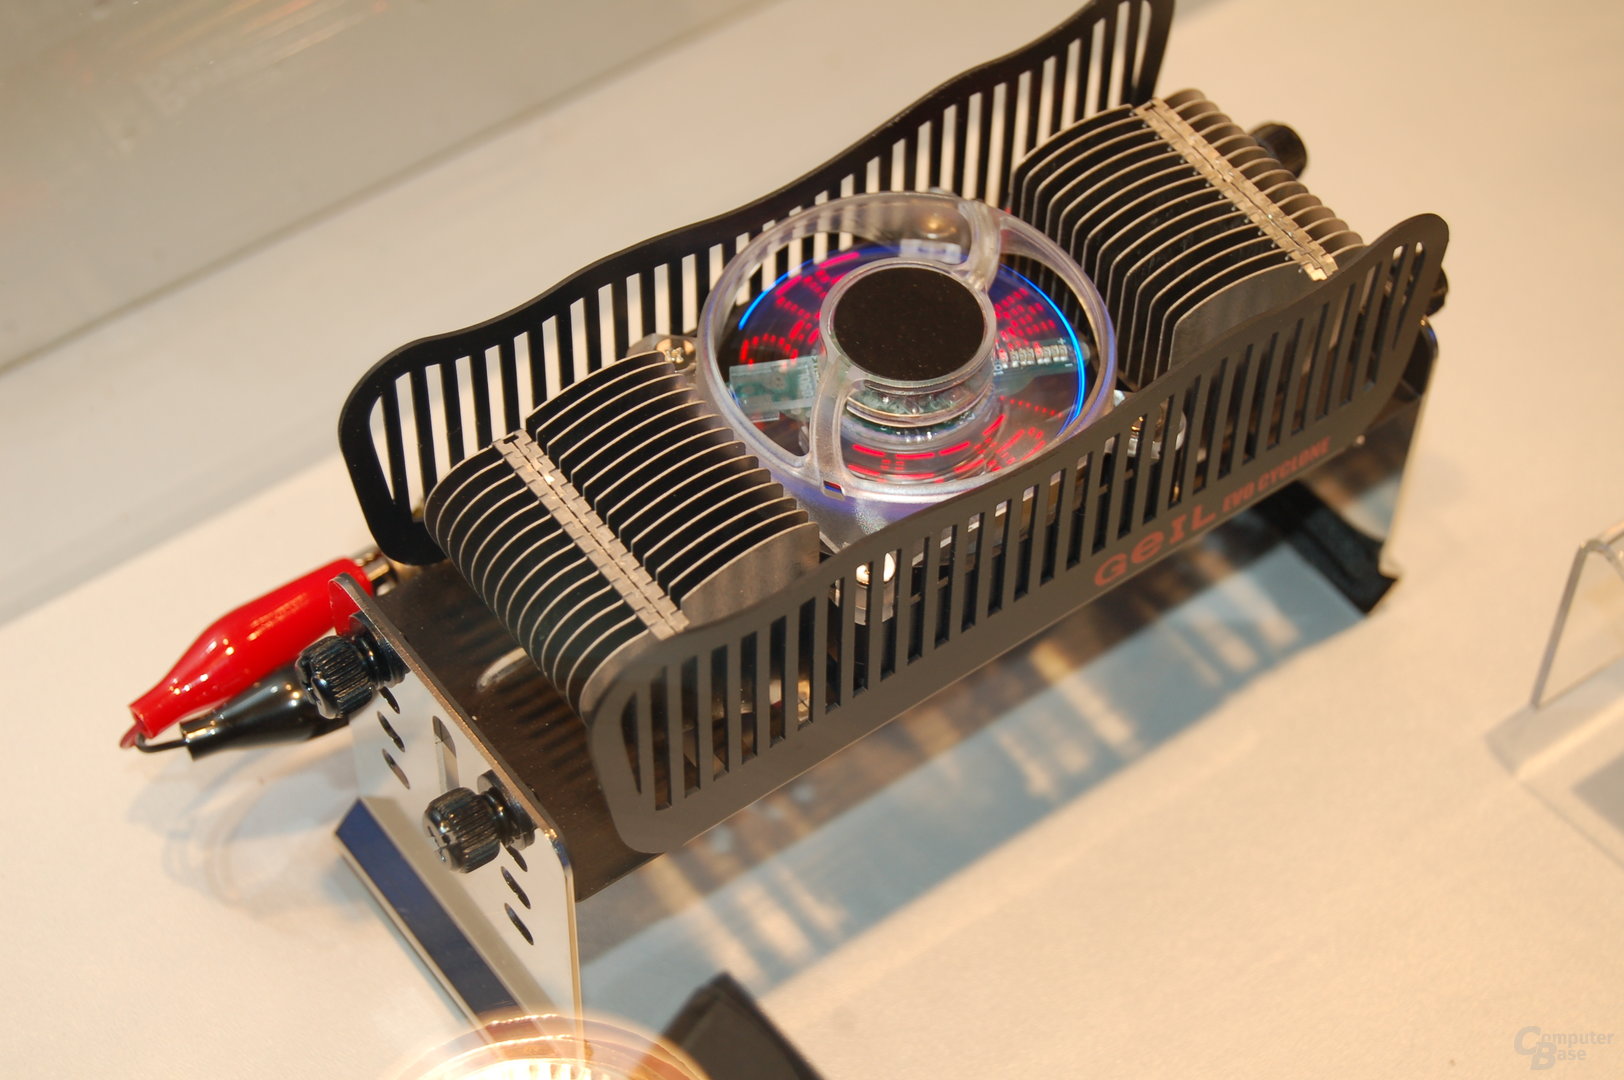 Prototyp des Evo Cyclone Hybrid Cooling Systems